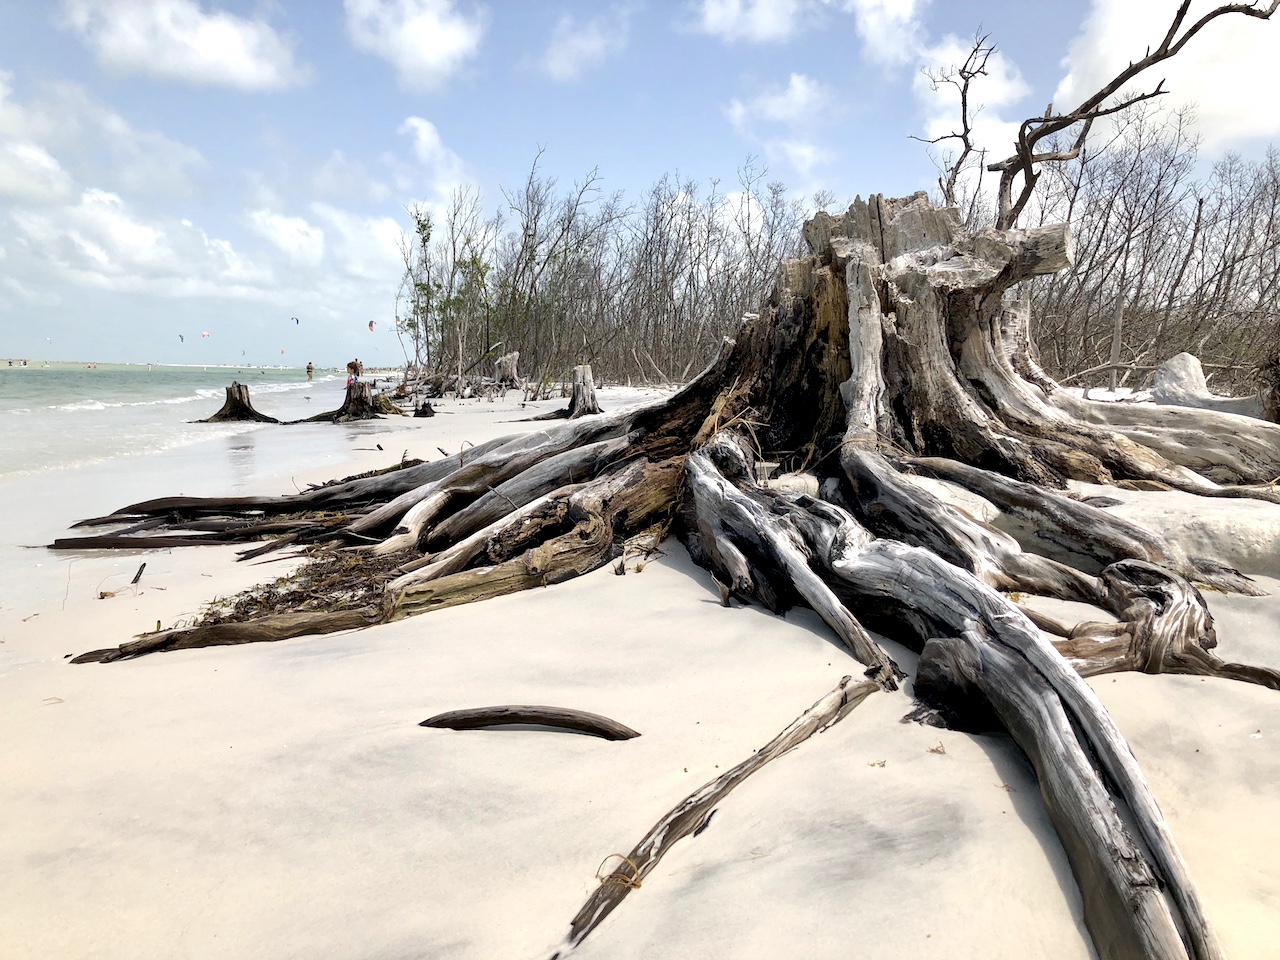 The nature is everywhere at Fort de Soto park, all the way to the beach itself